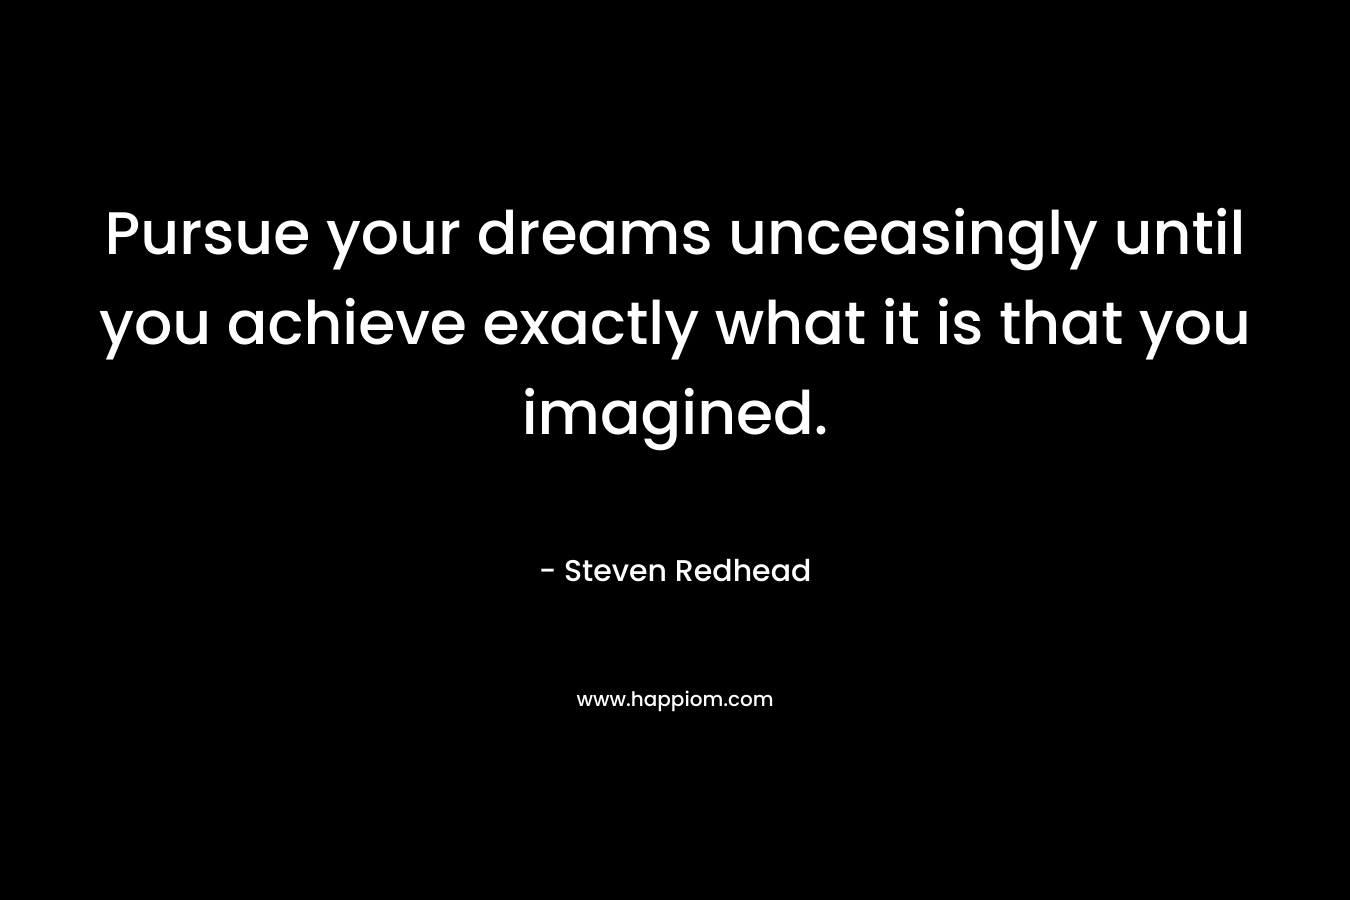 Pursue your dreams unceasingly until you achieve exactly what it is that you imagined.